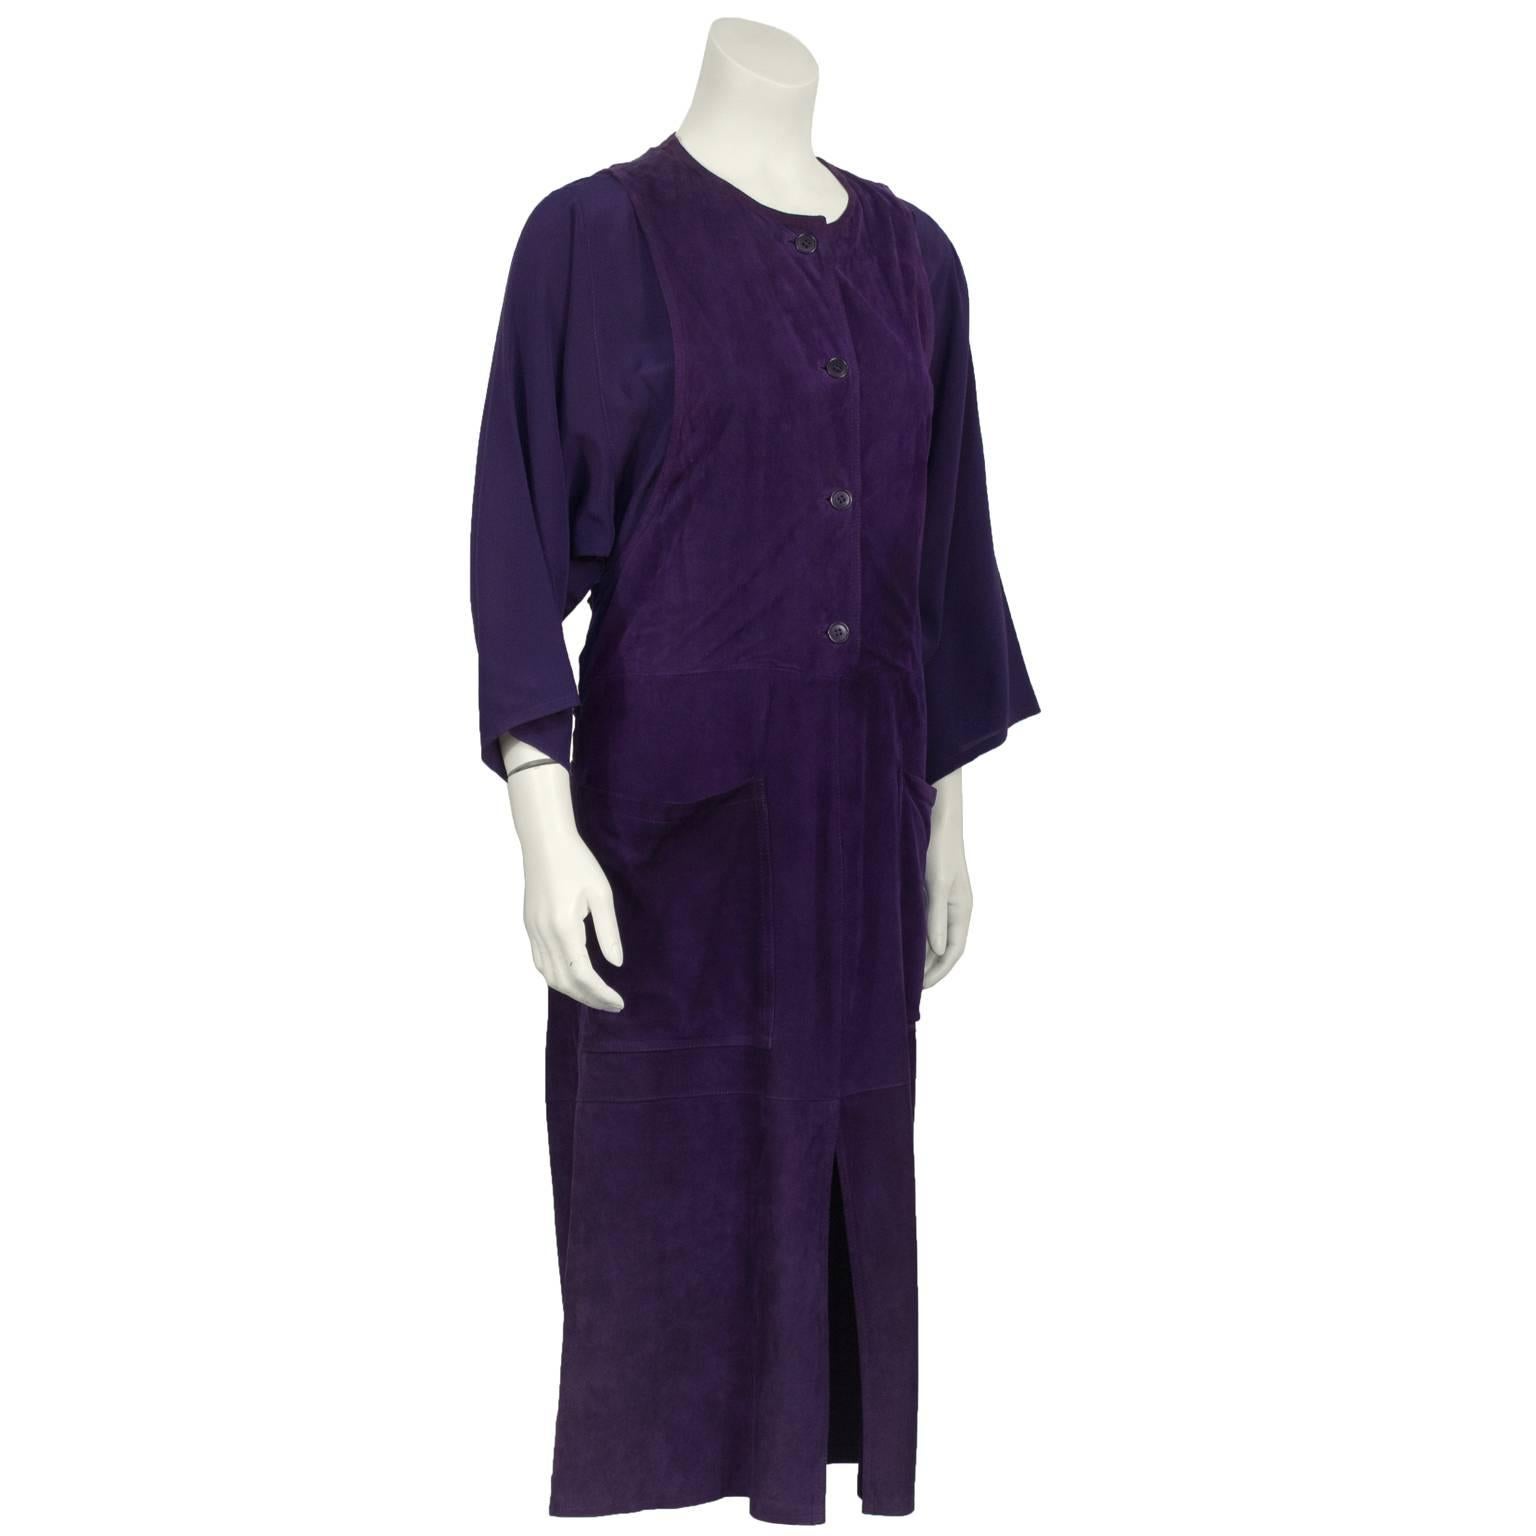 Anonymous plum suede and rayon crepe dress from the 1970's. Possibly designed by Jean Muir. The dress gives the illusion of wearing a dolman sleeve blouse underneath a suede jumper with buttons down the front, a front slit and oversized front